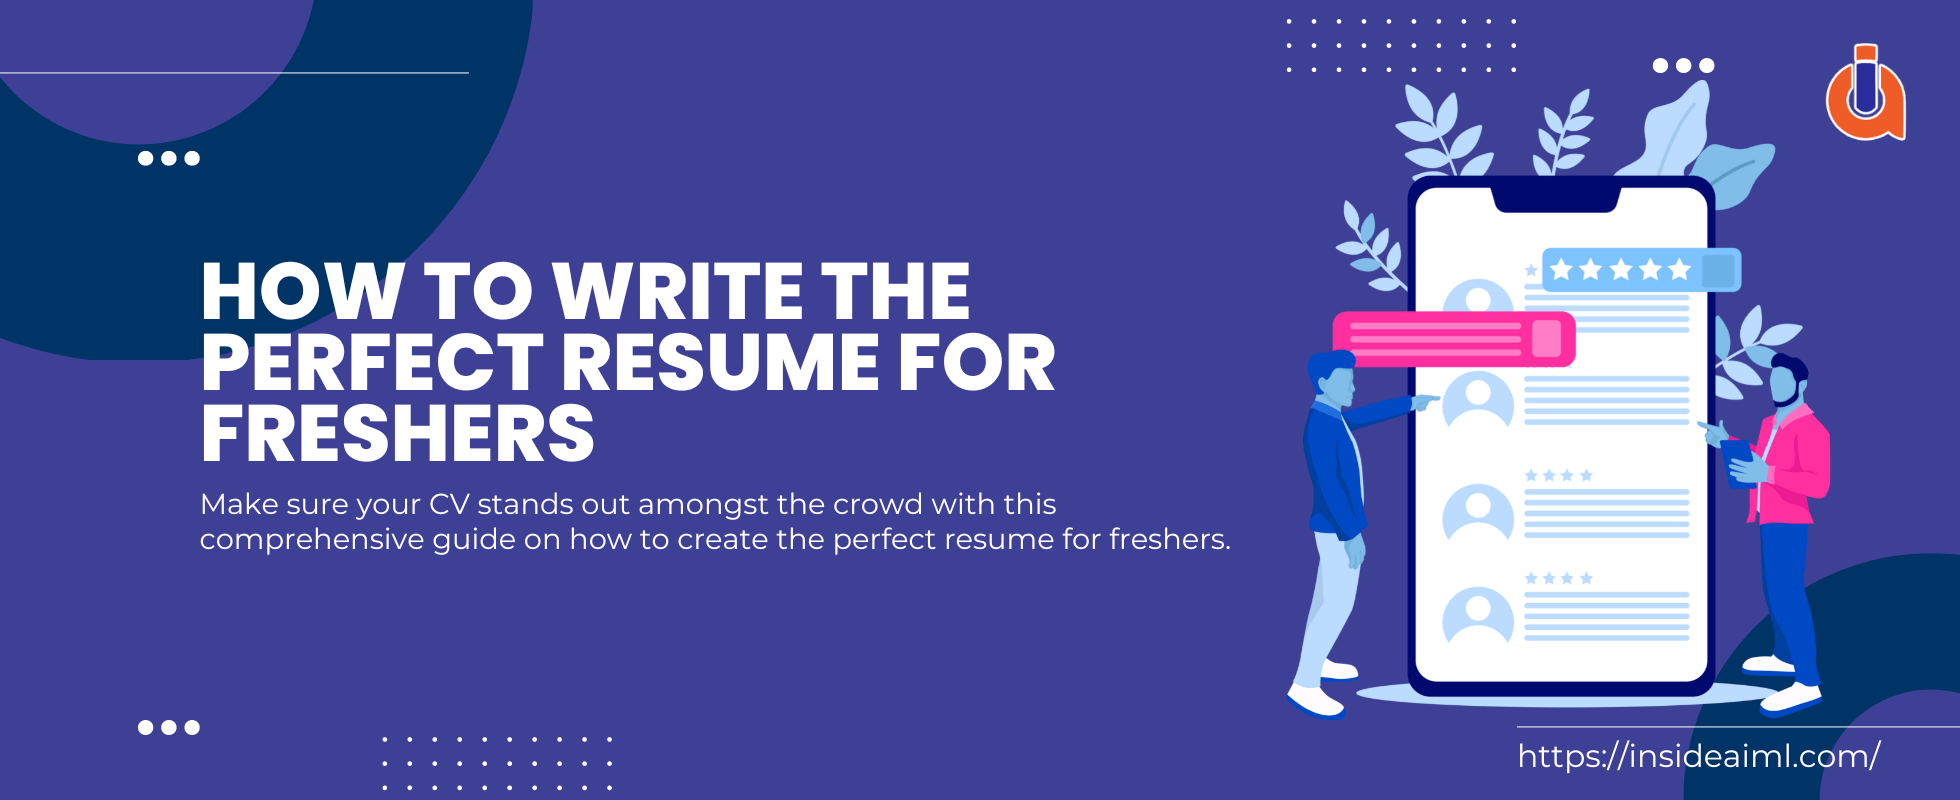 how to write a resume for freshers&nbsp;